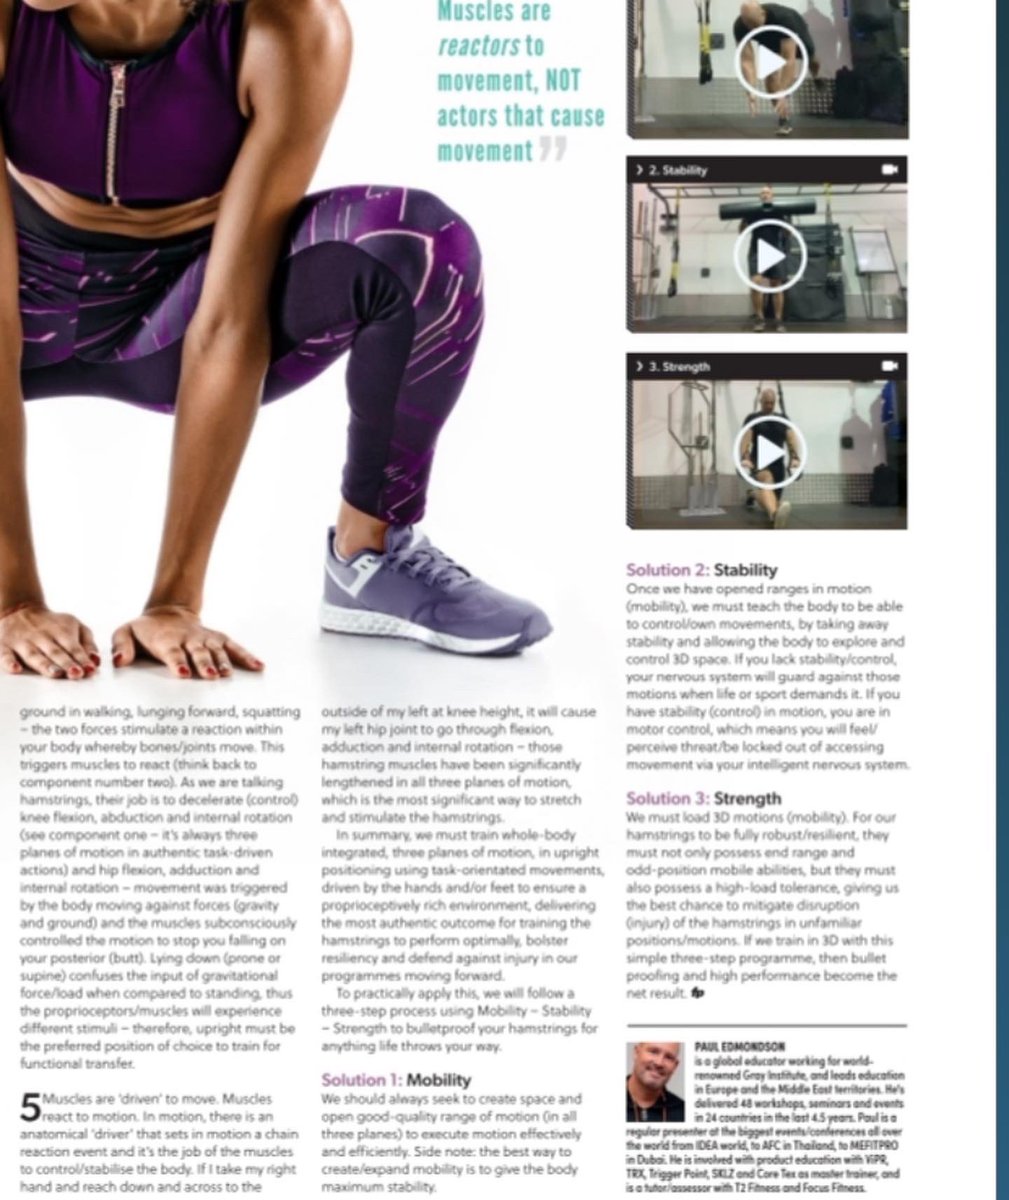 Thanks @FitProLtd for the latest magazine feature!! ‘Training the hamstrings for authentic function’ - leverages principles of applied functional sciences (AFS) by @GrayInstitute and uses a superb mobility - stability - strength progressive sequencing of exercises! @TRXtraining